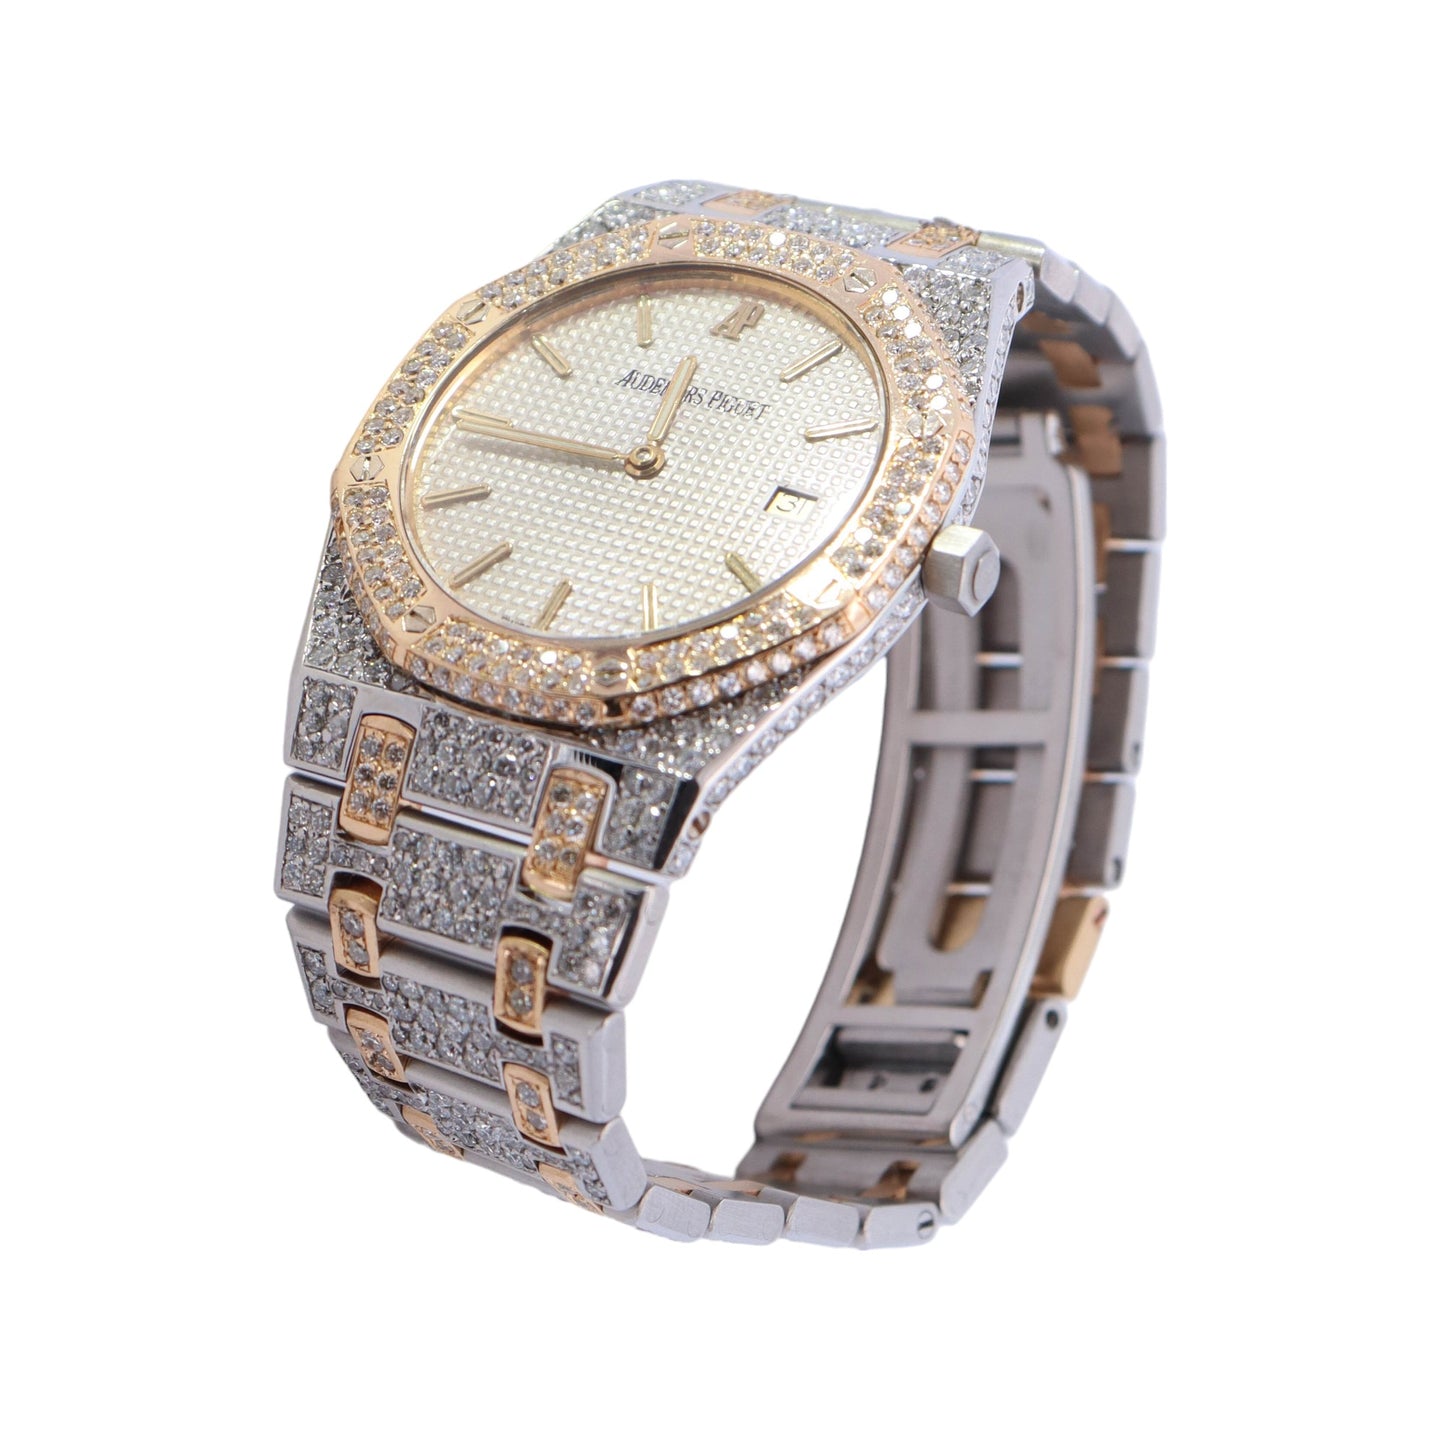 Buy Digital Seiko Watch Online In India - Etsy India